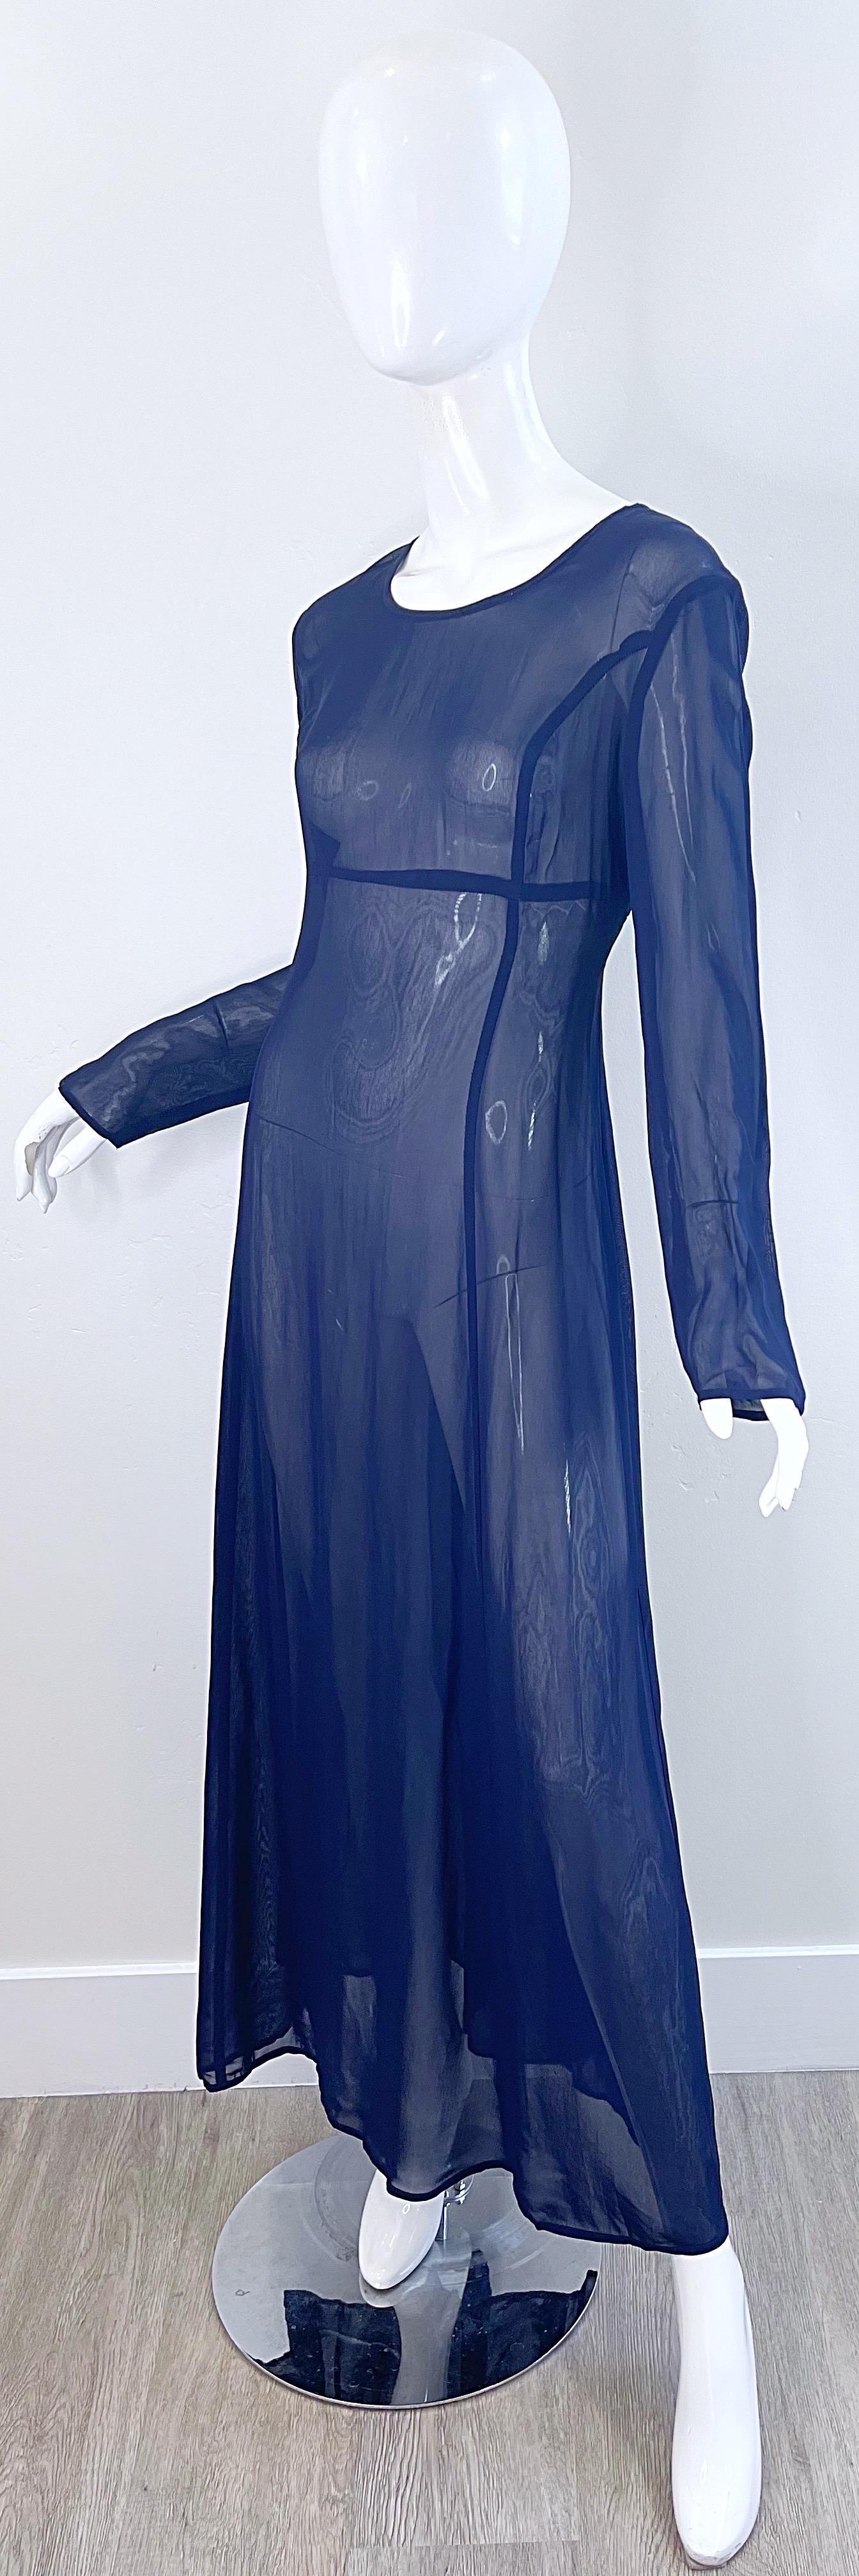 NWT 1990s I Magnin Size 10 Sheer Navy Blue Long Sleeve Vintage 90s Maxi Dress For Sale 1